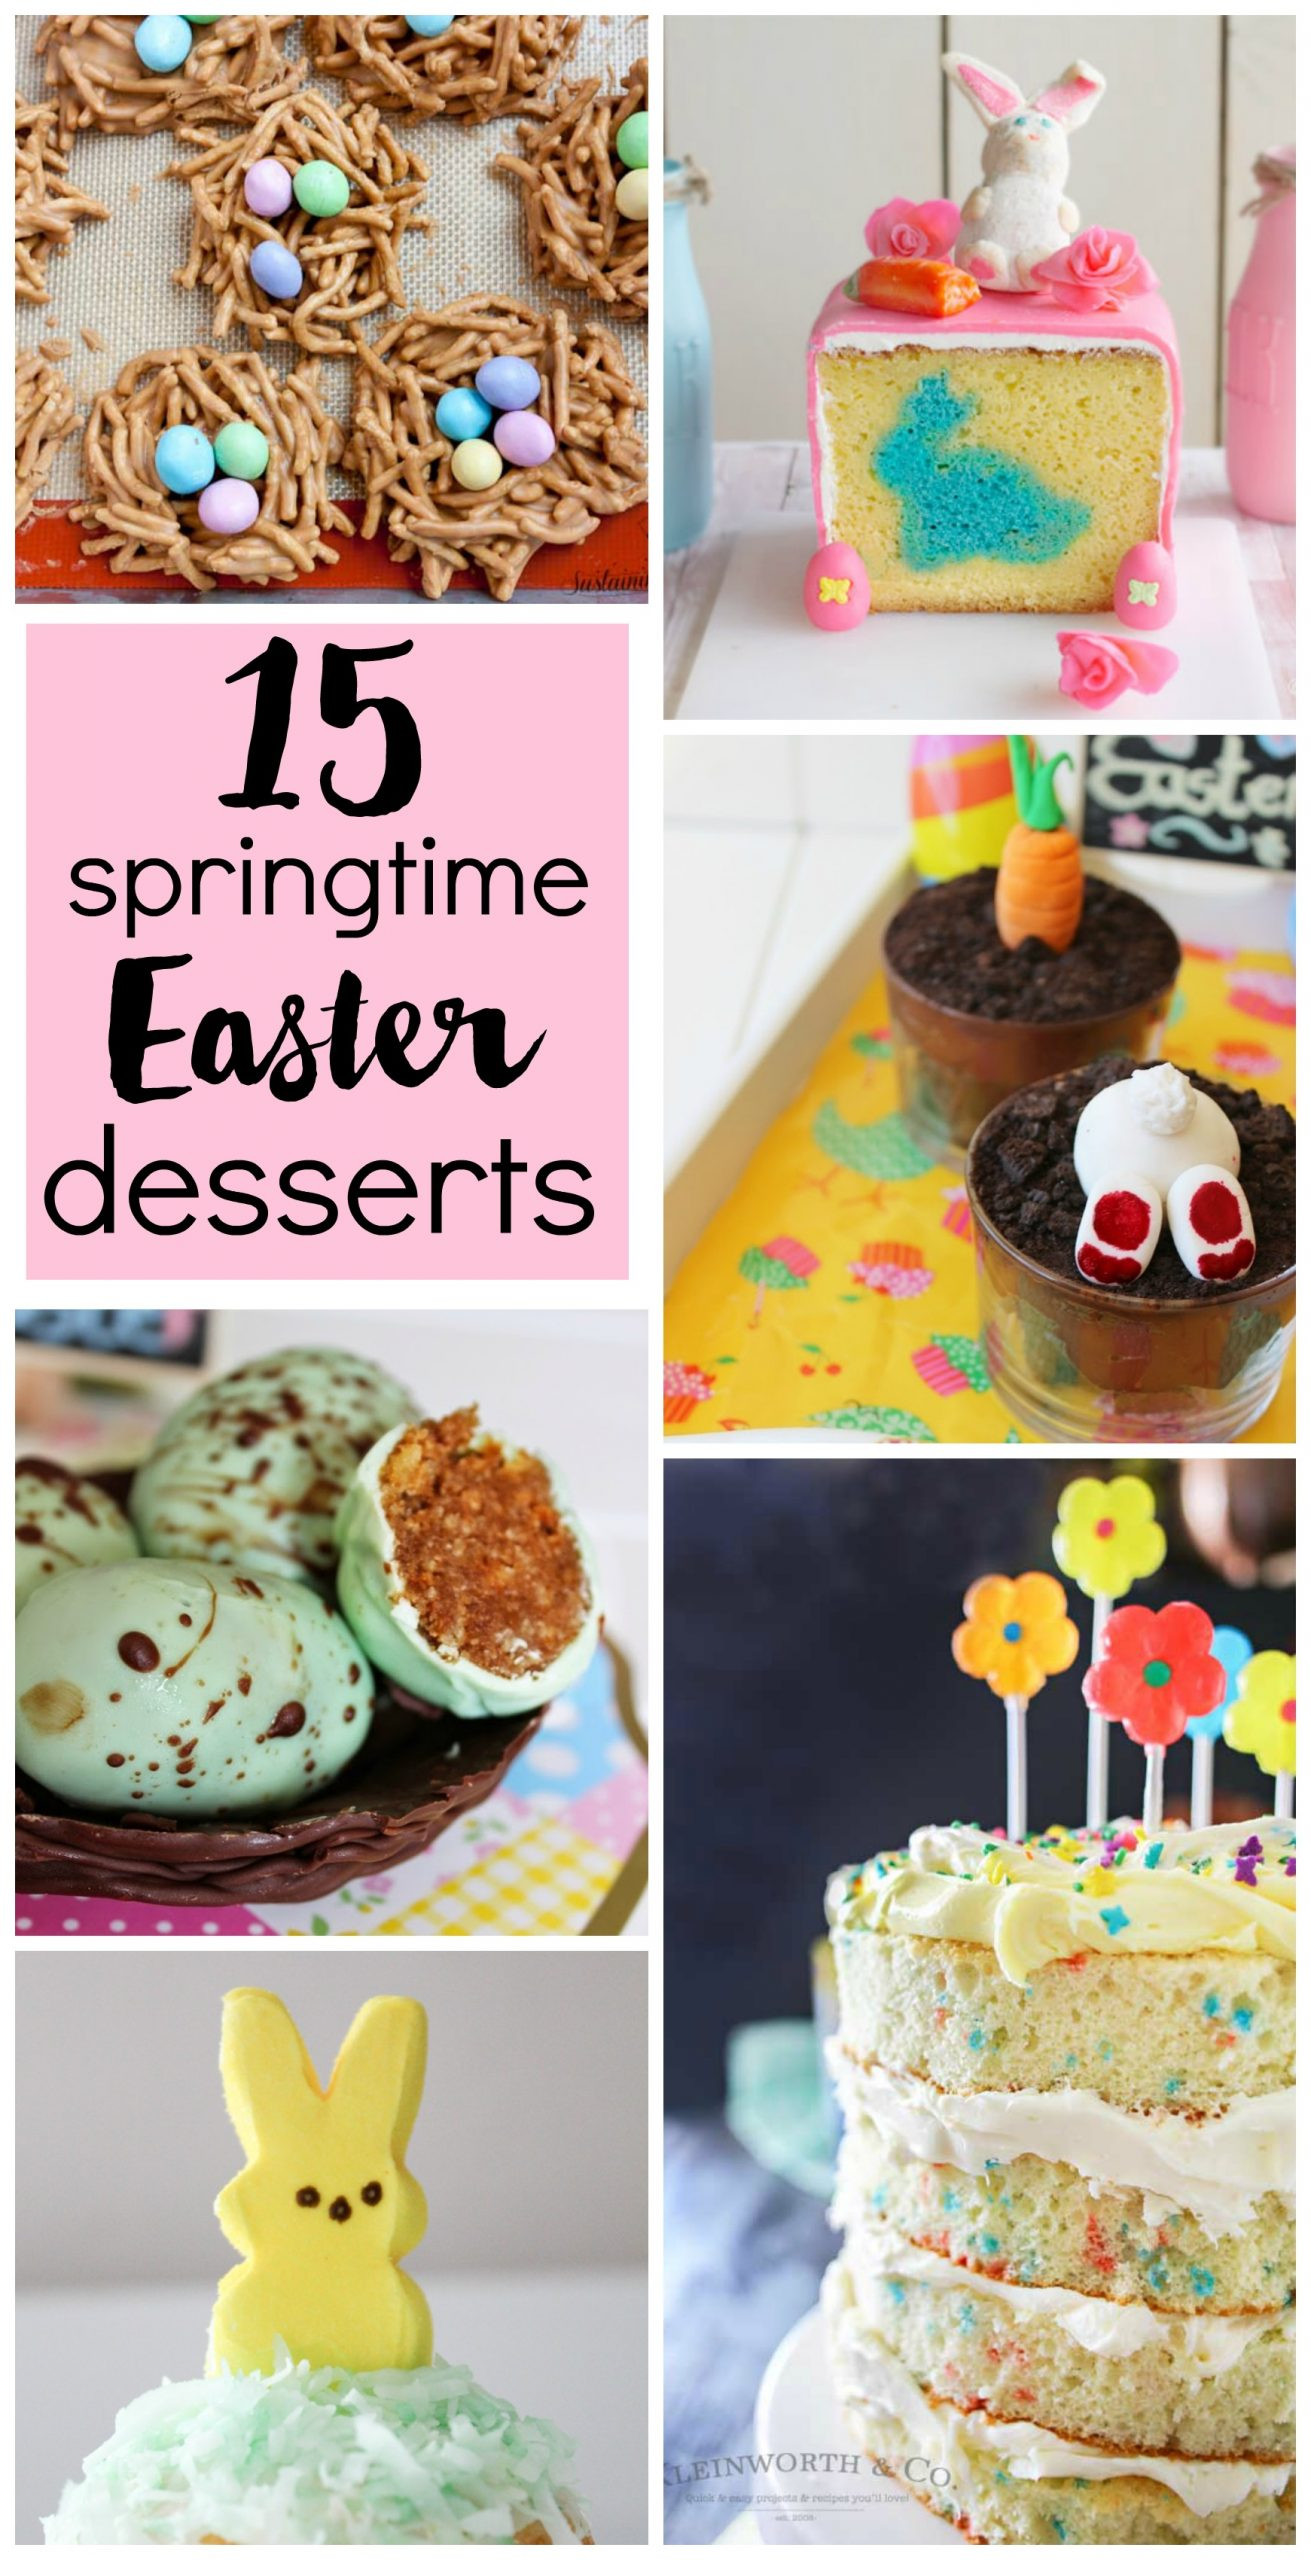 Easy Easter Desserts Recipes With Pictures
 15 Springtime Easter Desserts A Savory Feast